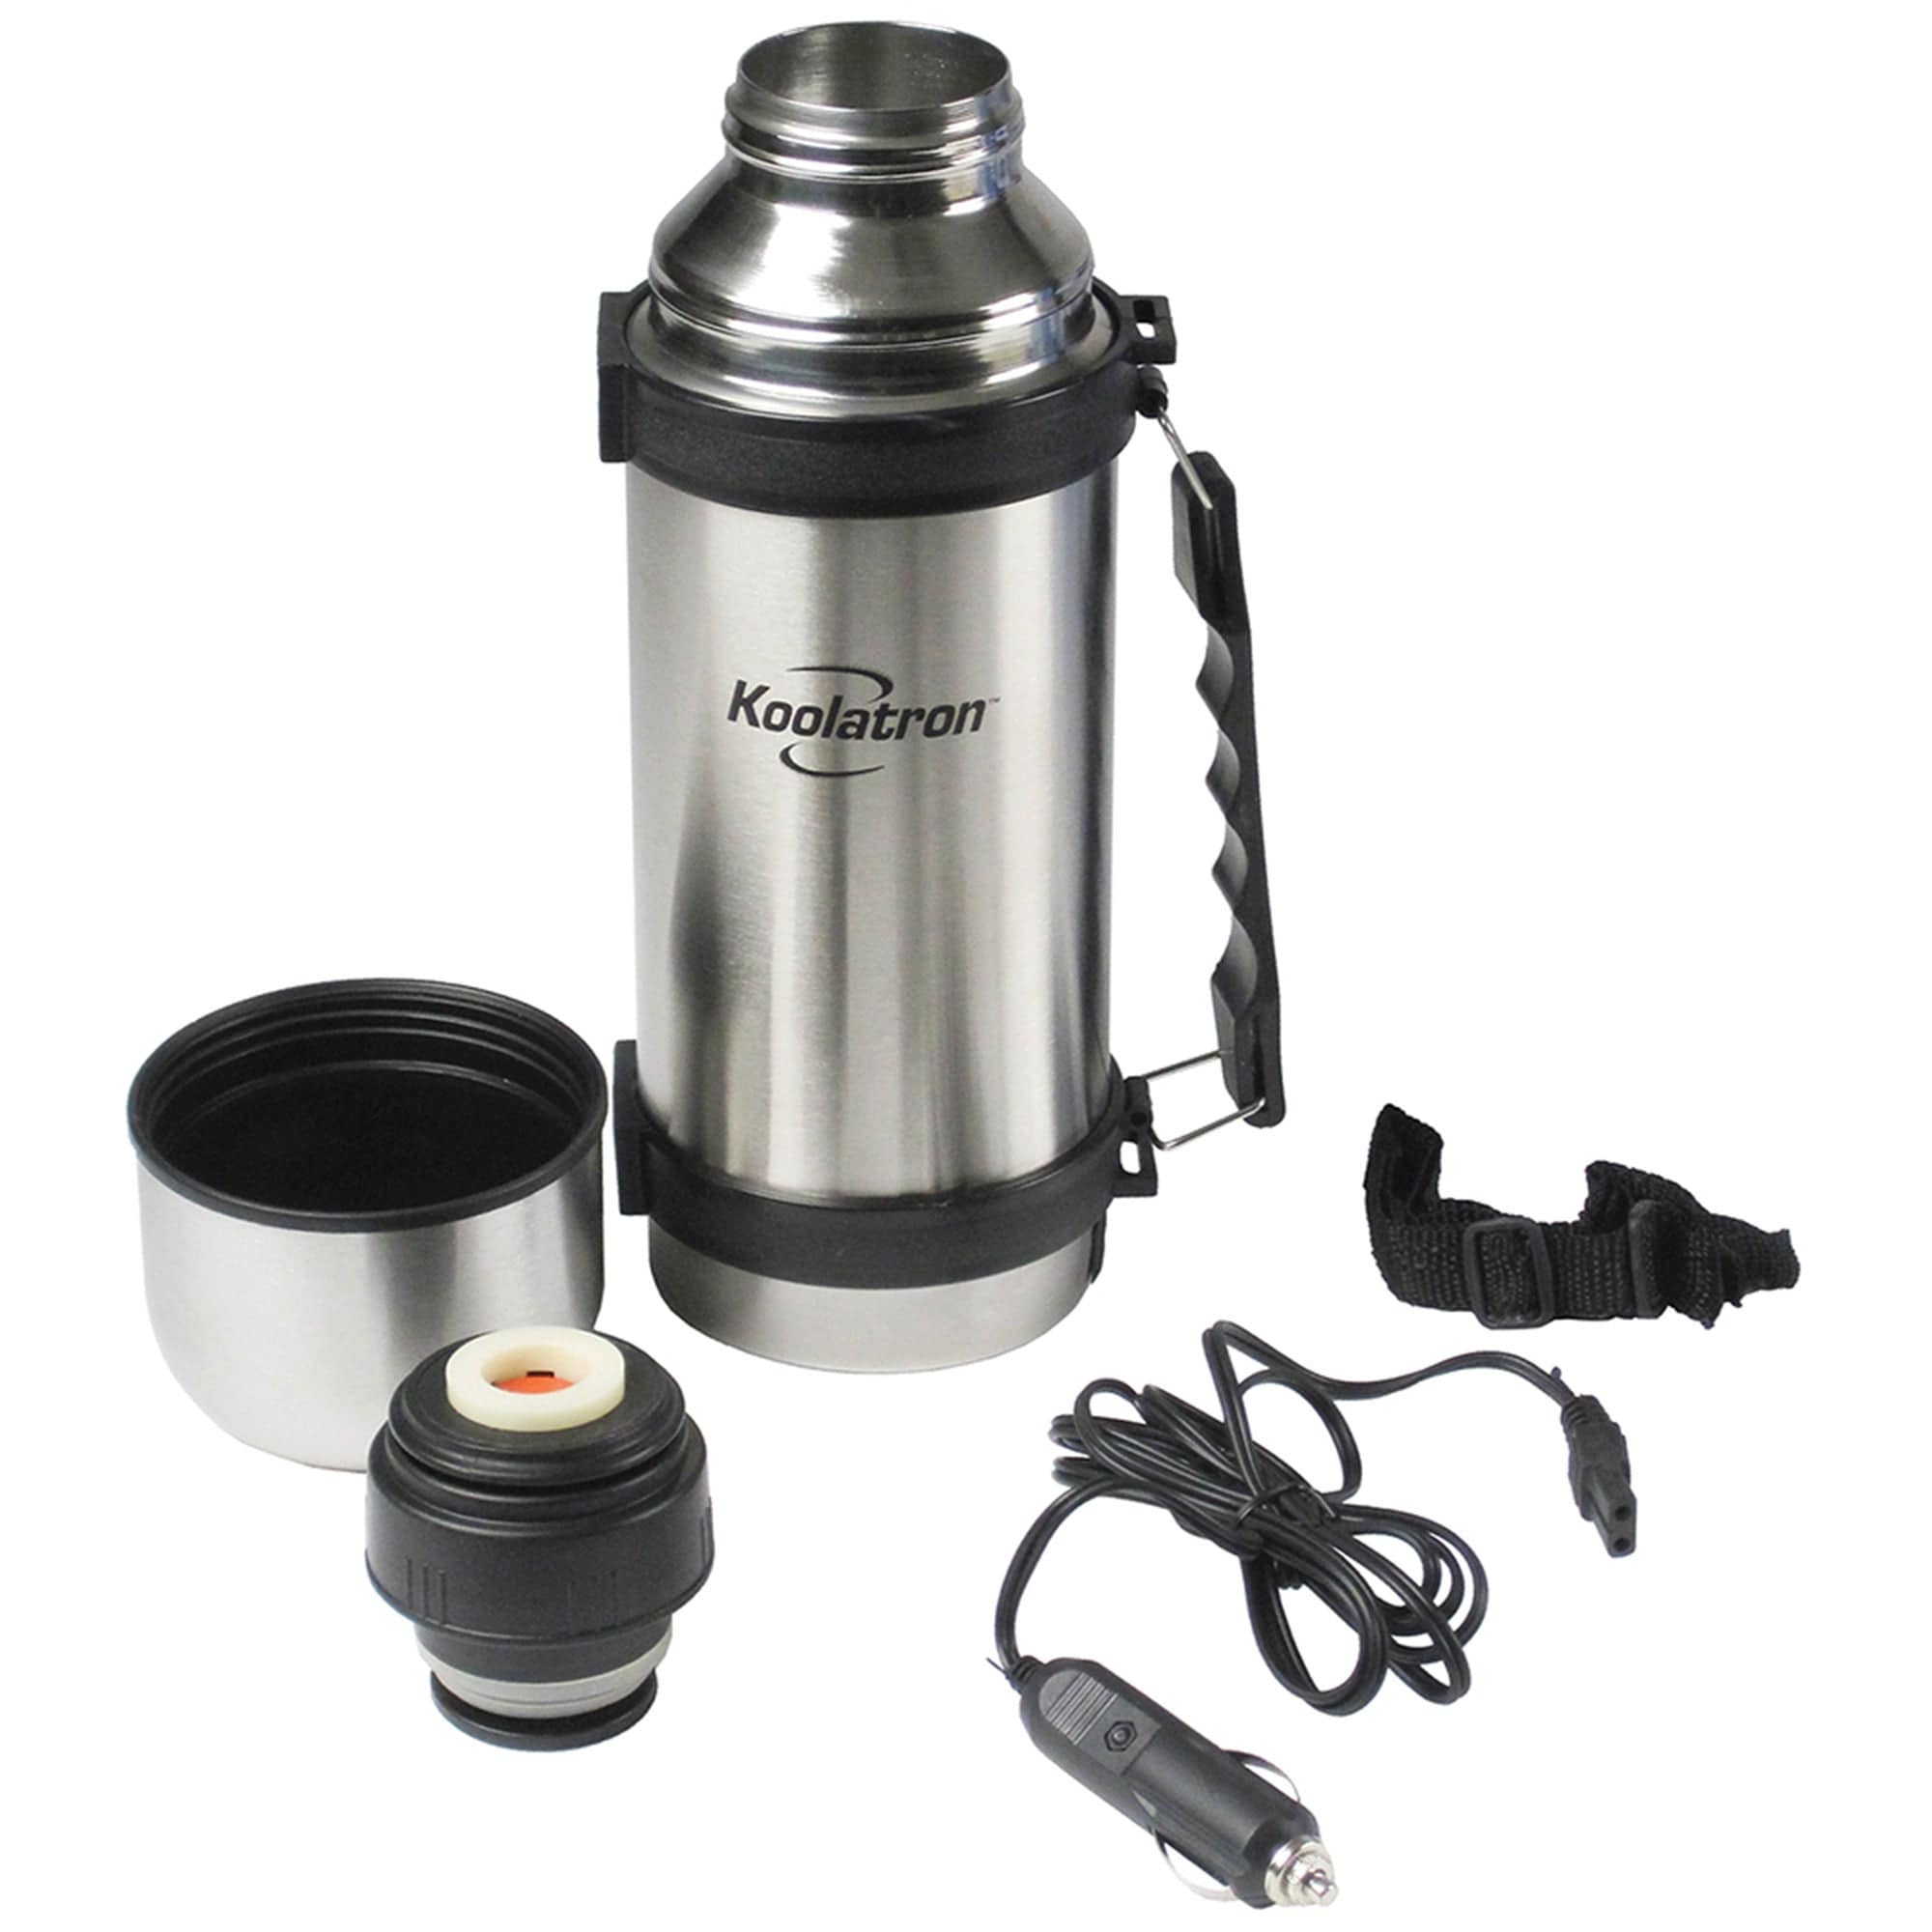 https://ak1.ostkcdn.com/images/products/is/images/direct/4c74902ef14355c11d3d0e48379360f6929b9fd2/Koolatron-12V-Insulated-Vacuum-Flask-with-Heater%2C-1L-Stainless-Steel.jpg